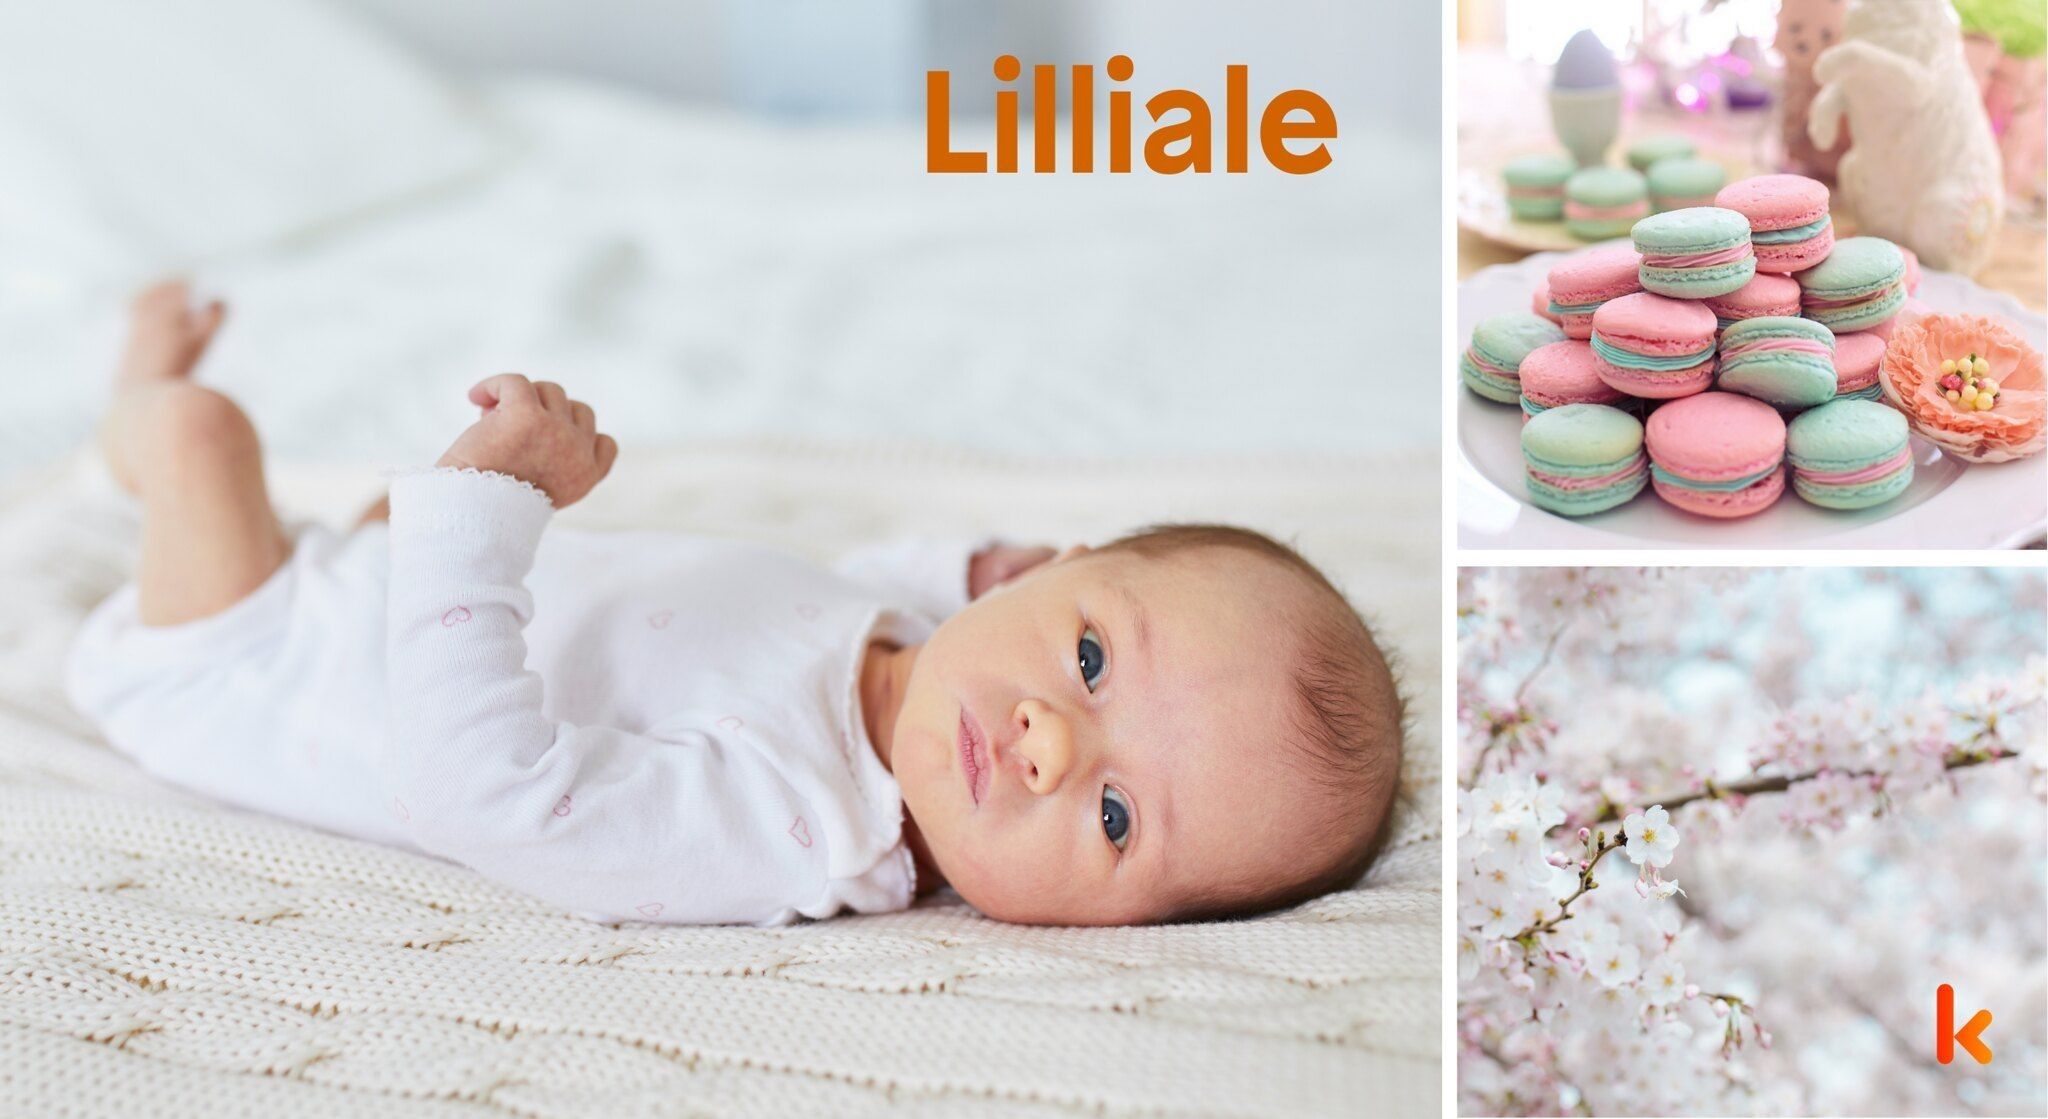 Meaning of the name Lilliale